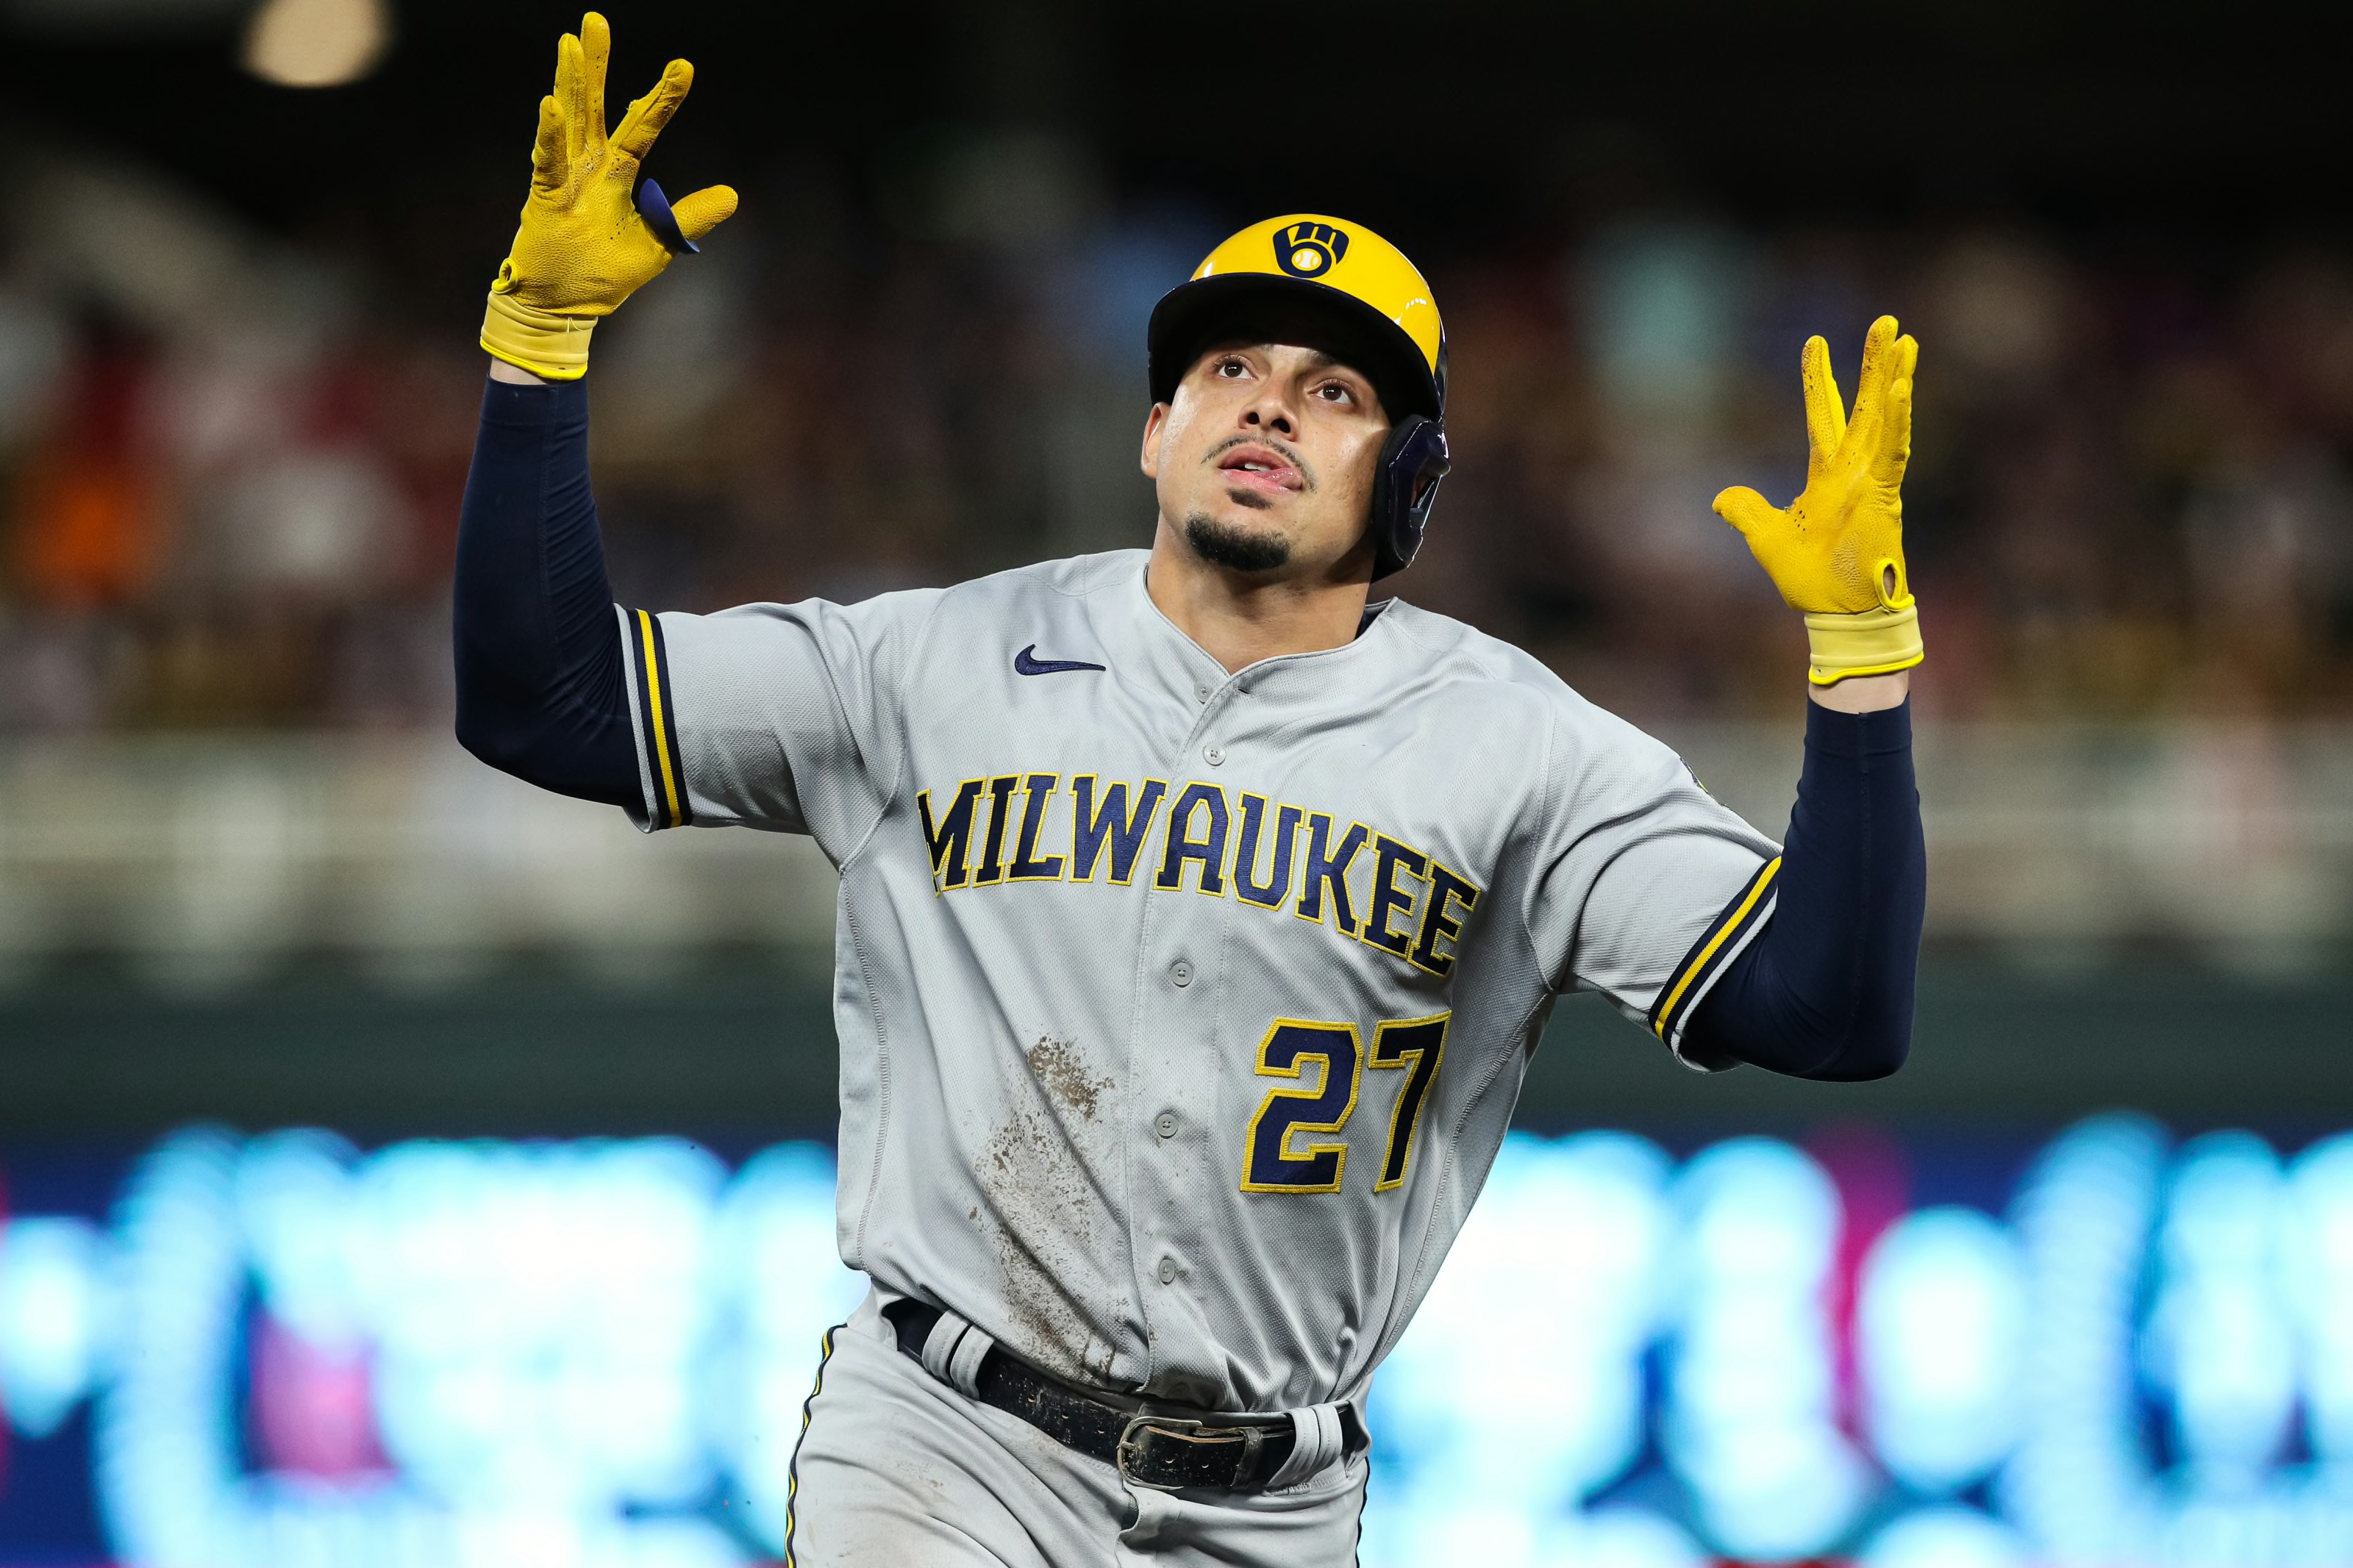 Willy Adames #27 of the Milwaukee Brewers celebrates his two-run home run as he rounds the bases against the Minnesota Twins